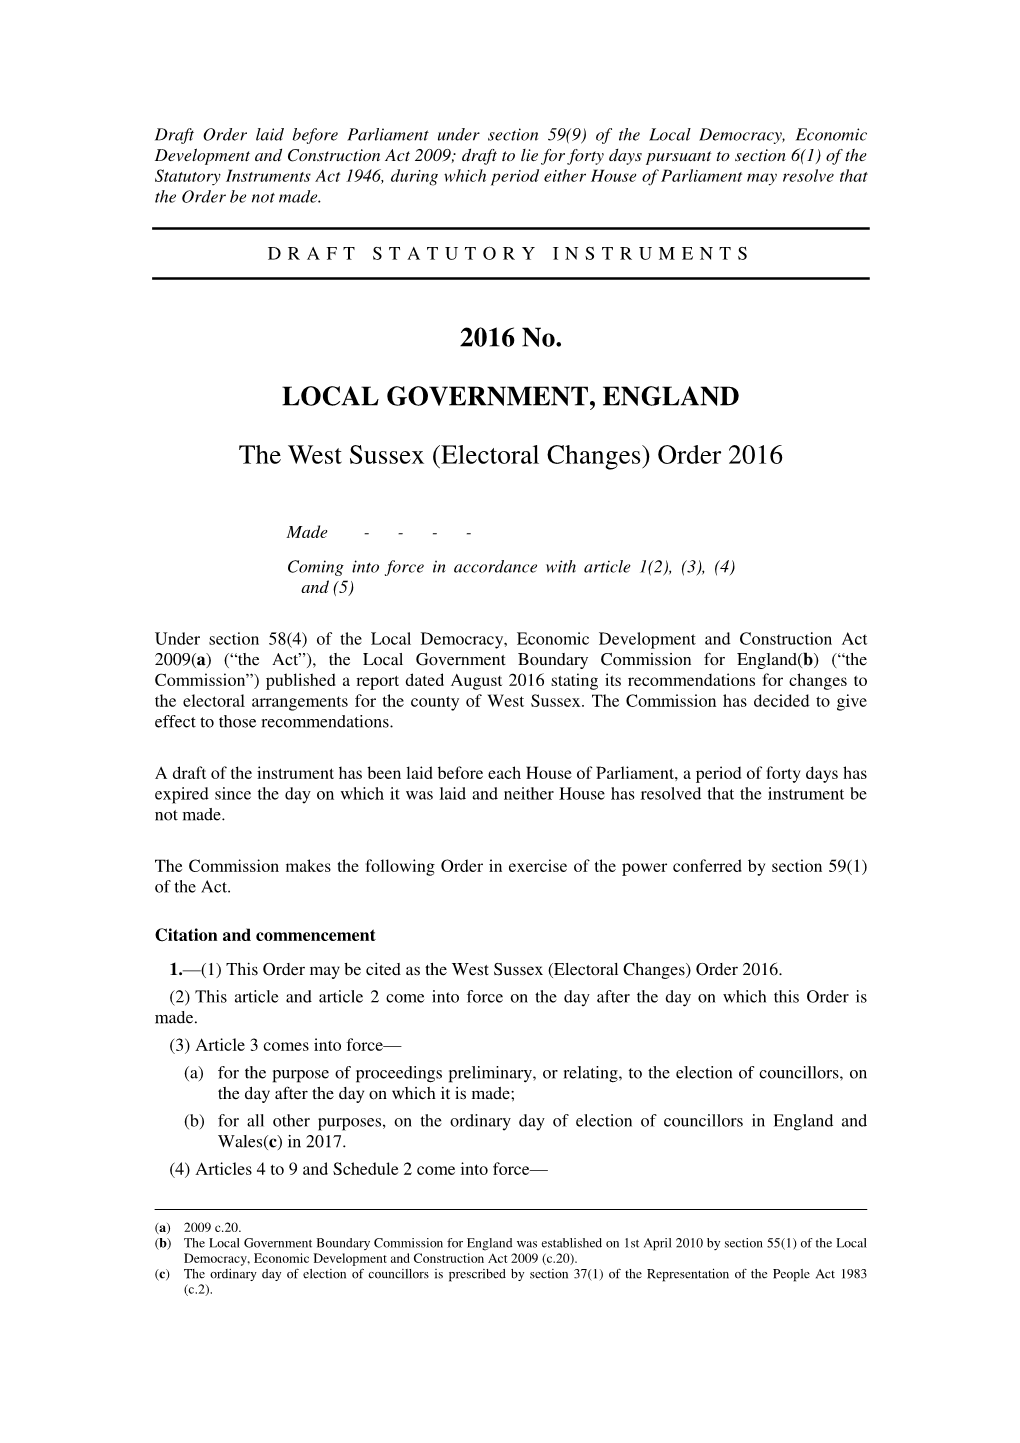 The West Sussex (Electoral Changes) Order 2016